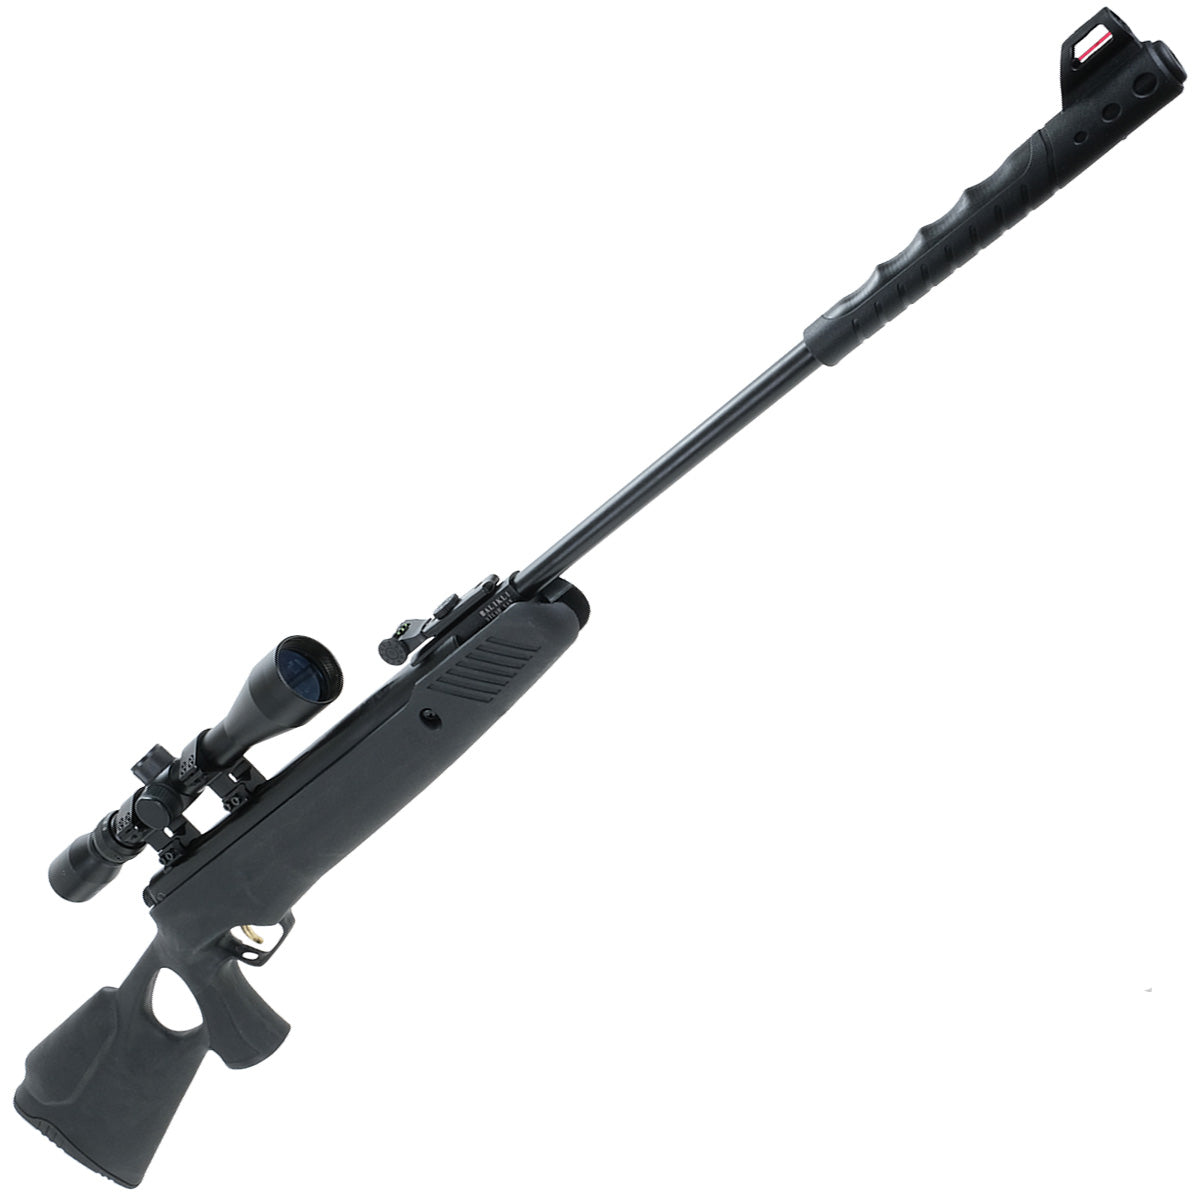 SALIX, TRIMEX ARMS TX04 BREAK BARREL SPRING AIR RIFLE WITH SYNTHETIC STOCK .177